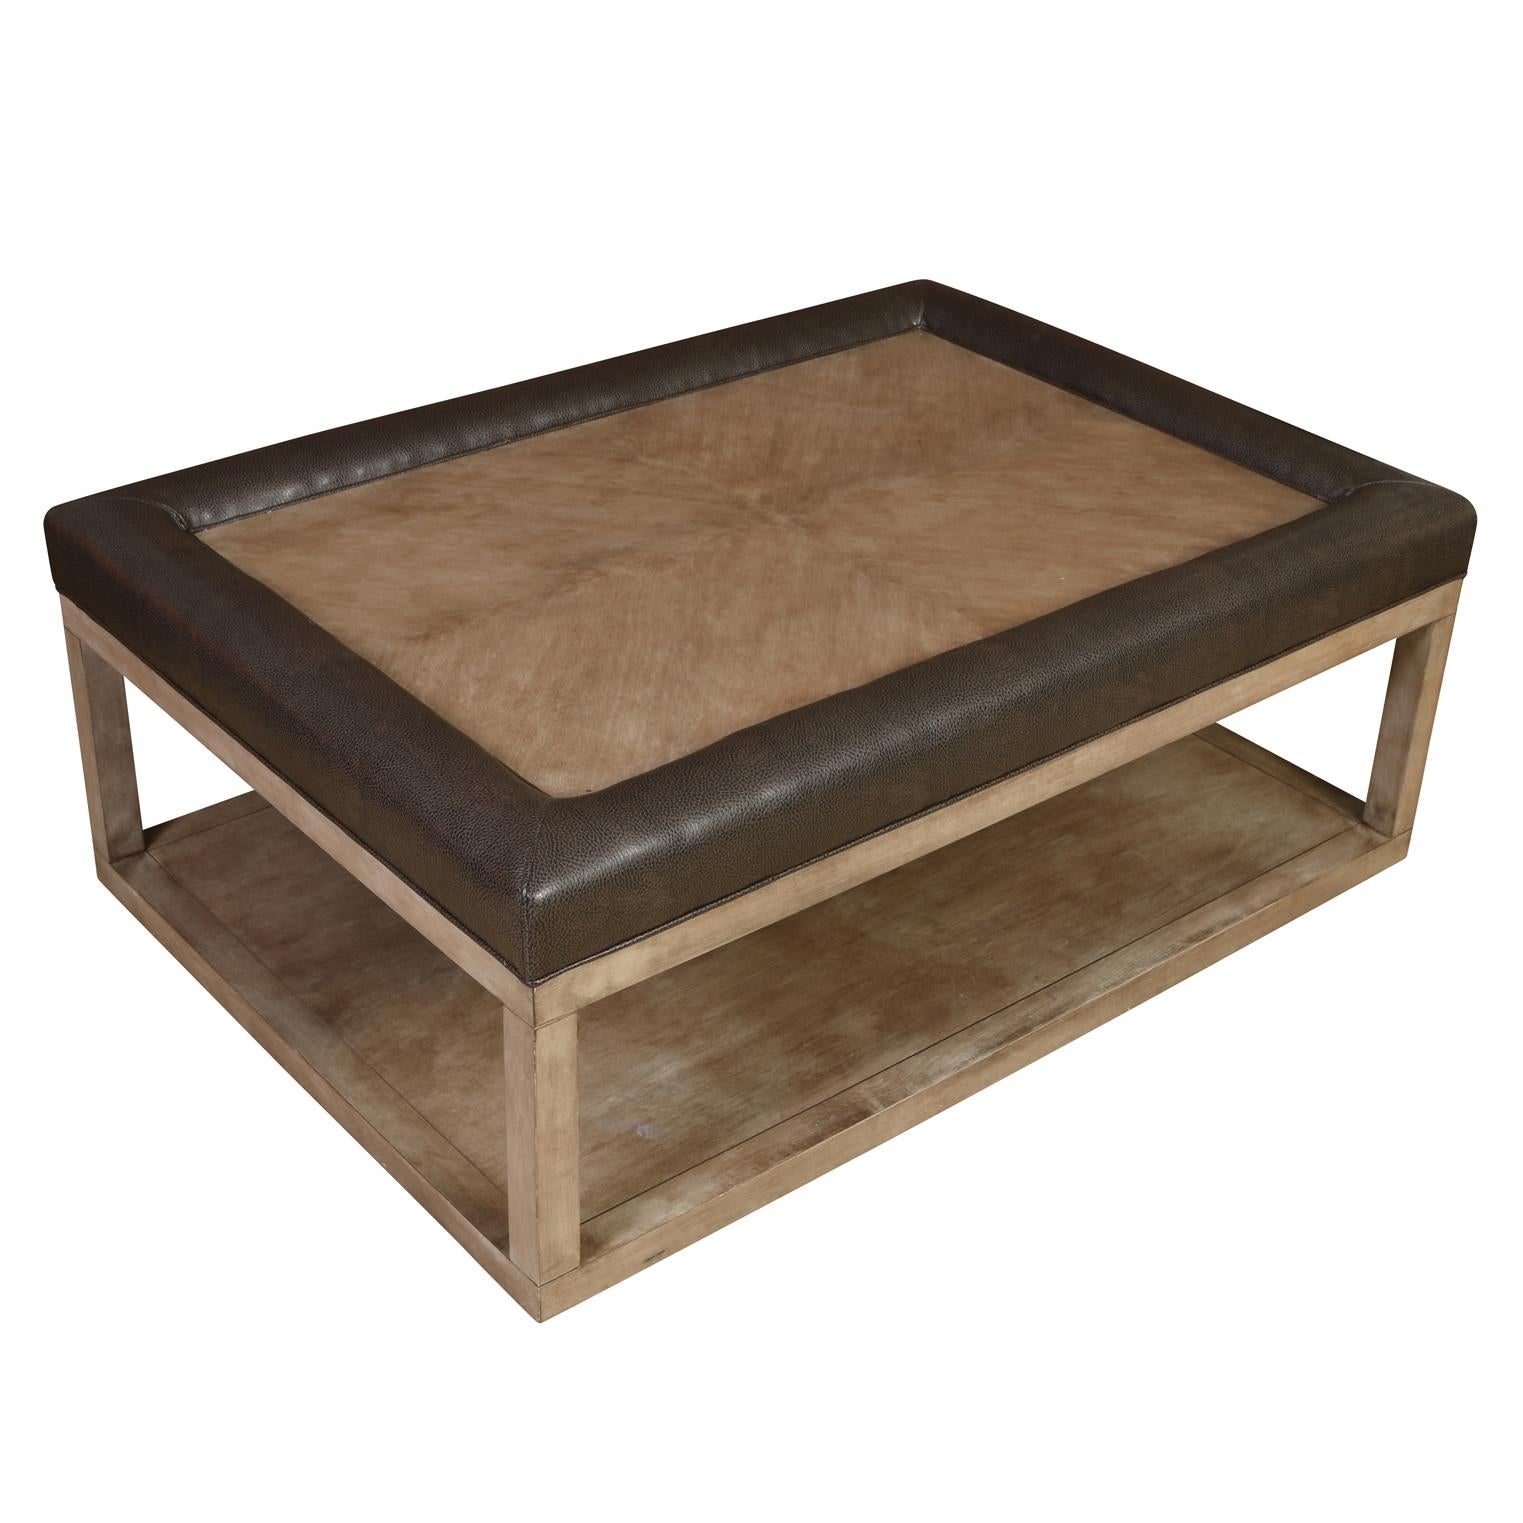 A modern rectangular two tiered coffee table of gray stained wood and brown leather trim detail.